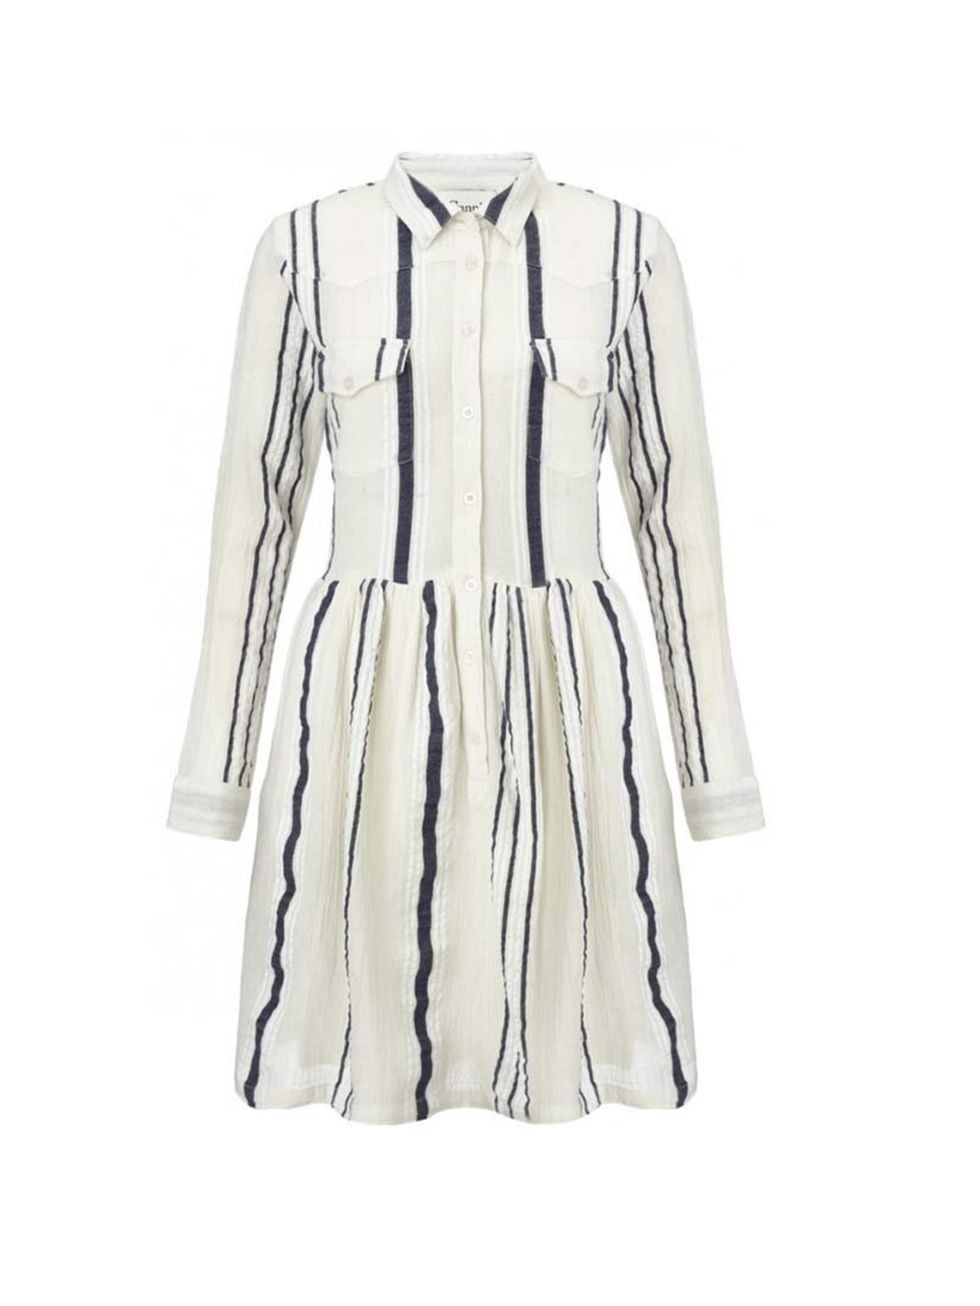 <p>Pair with tan ankle boots and layers of gold jewellery.</p><p>Ganni dress, £110 at <a href="http://www.atterleyroad.com/linen-stripe-dress-1.html">Atterley Road</a></p>